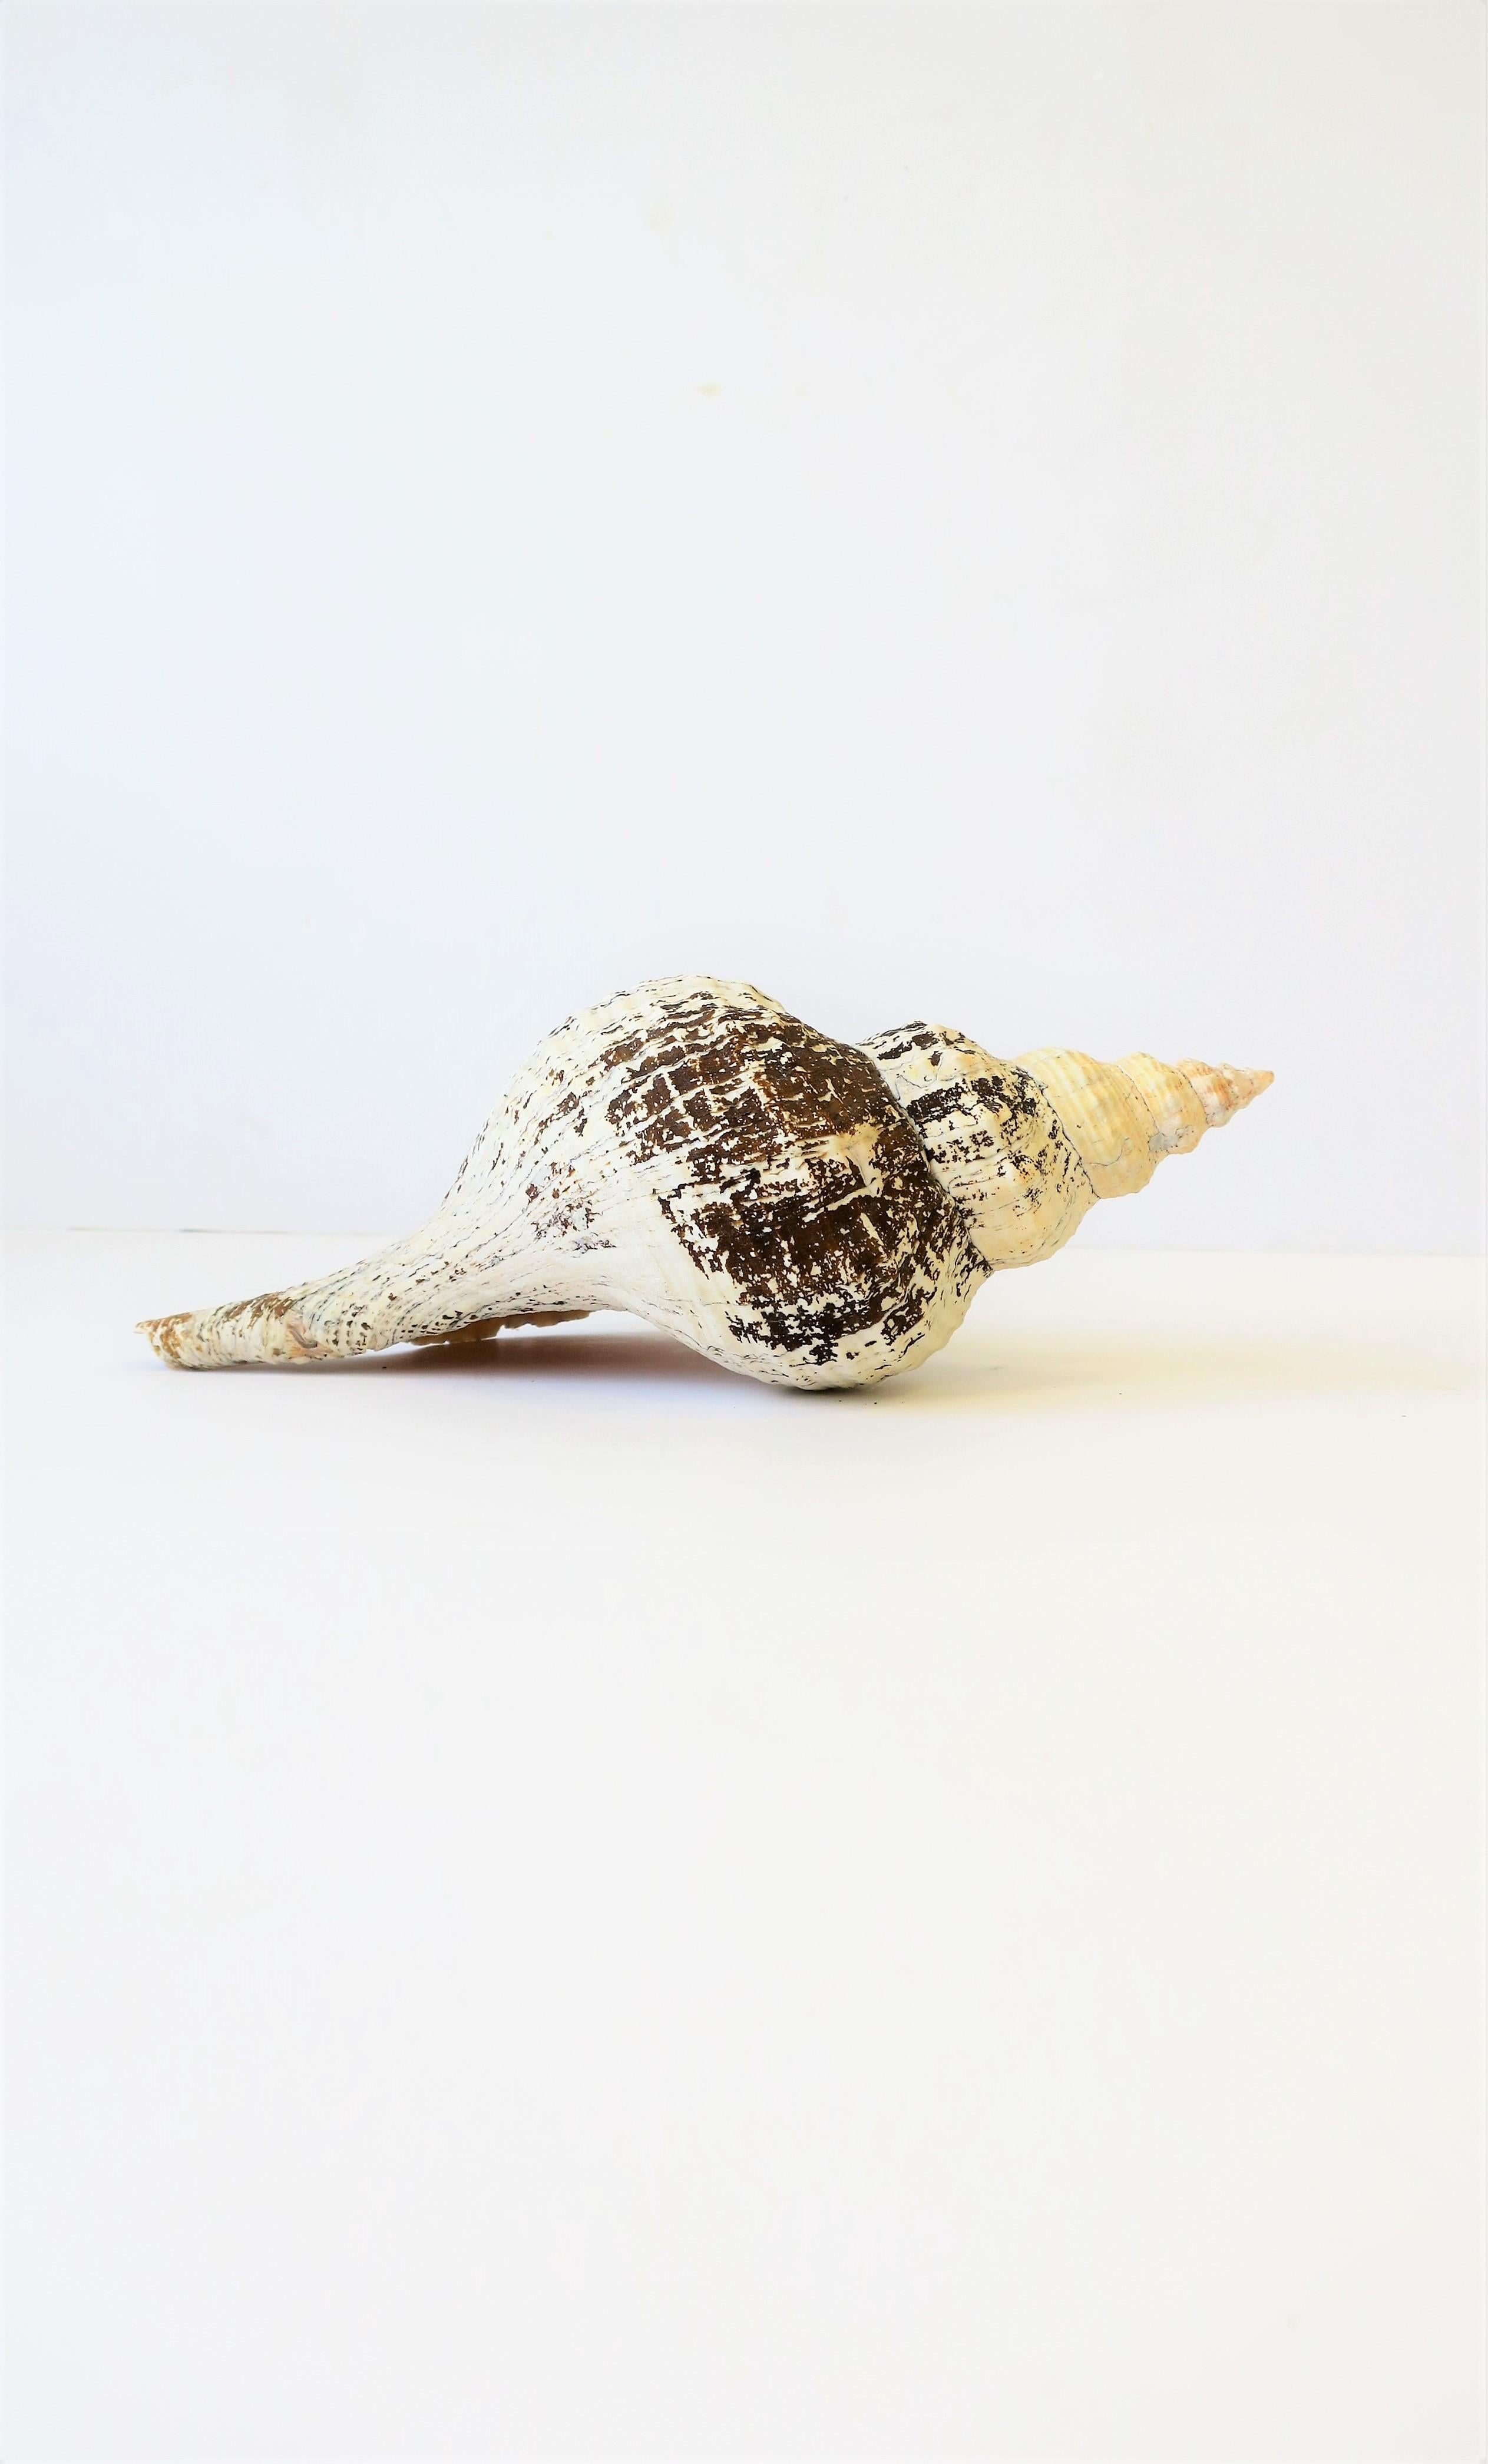 A beautiful, relatively large, seashell with natural hues of white, cream, and brown. Seashell is 13 inches long. 

Shell measures: 4.5